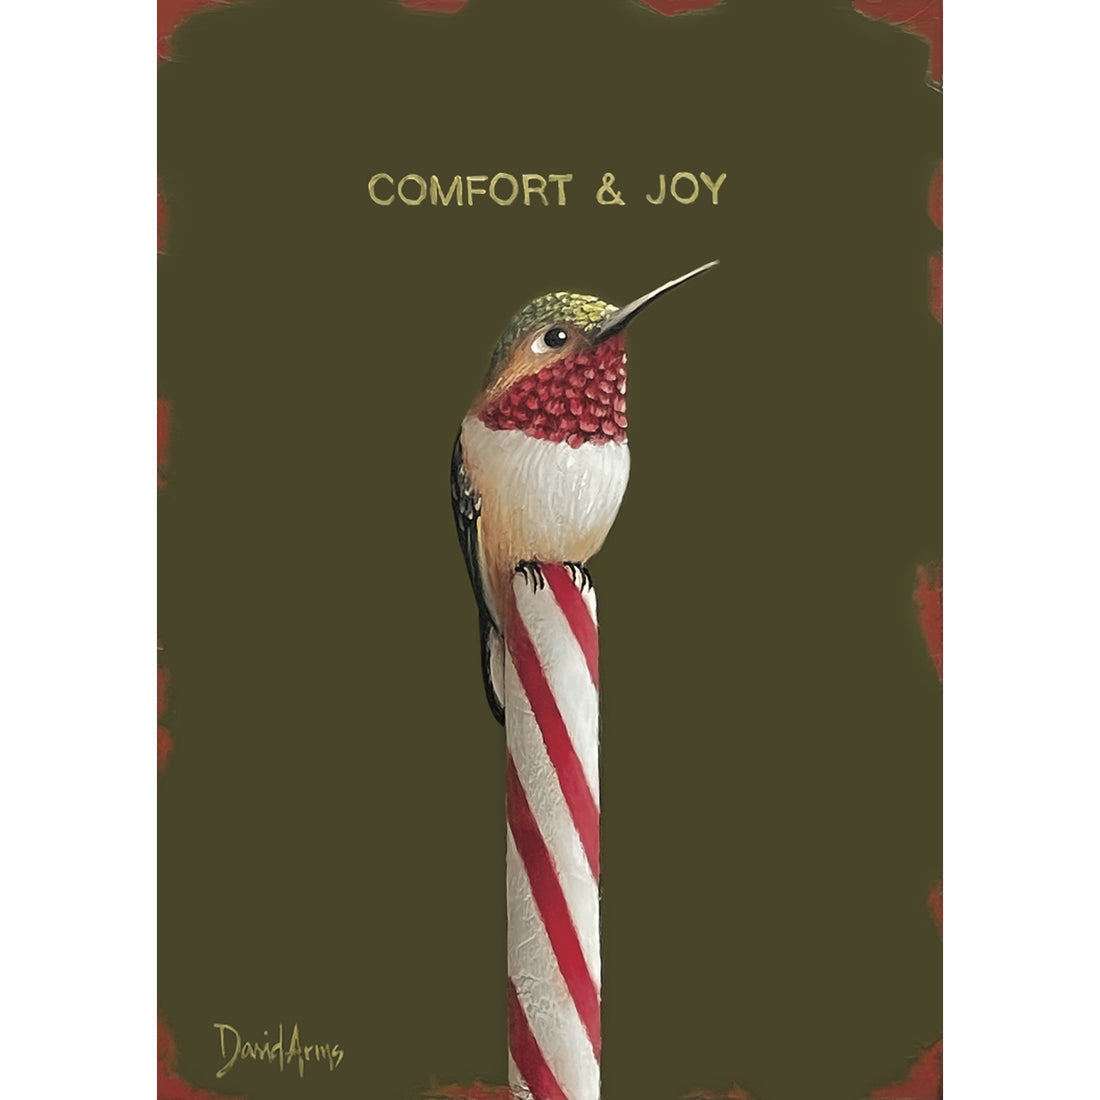 An illustration of a white, red and green hummingbird resting on the tip of a candy cane over an olive green background, &quot;COMFORT &amp; JOY&quot; printed in yellow above the bird.